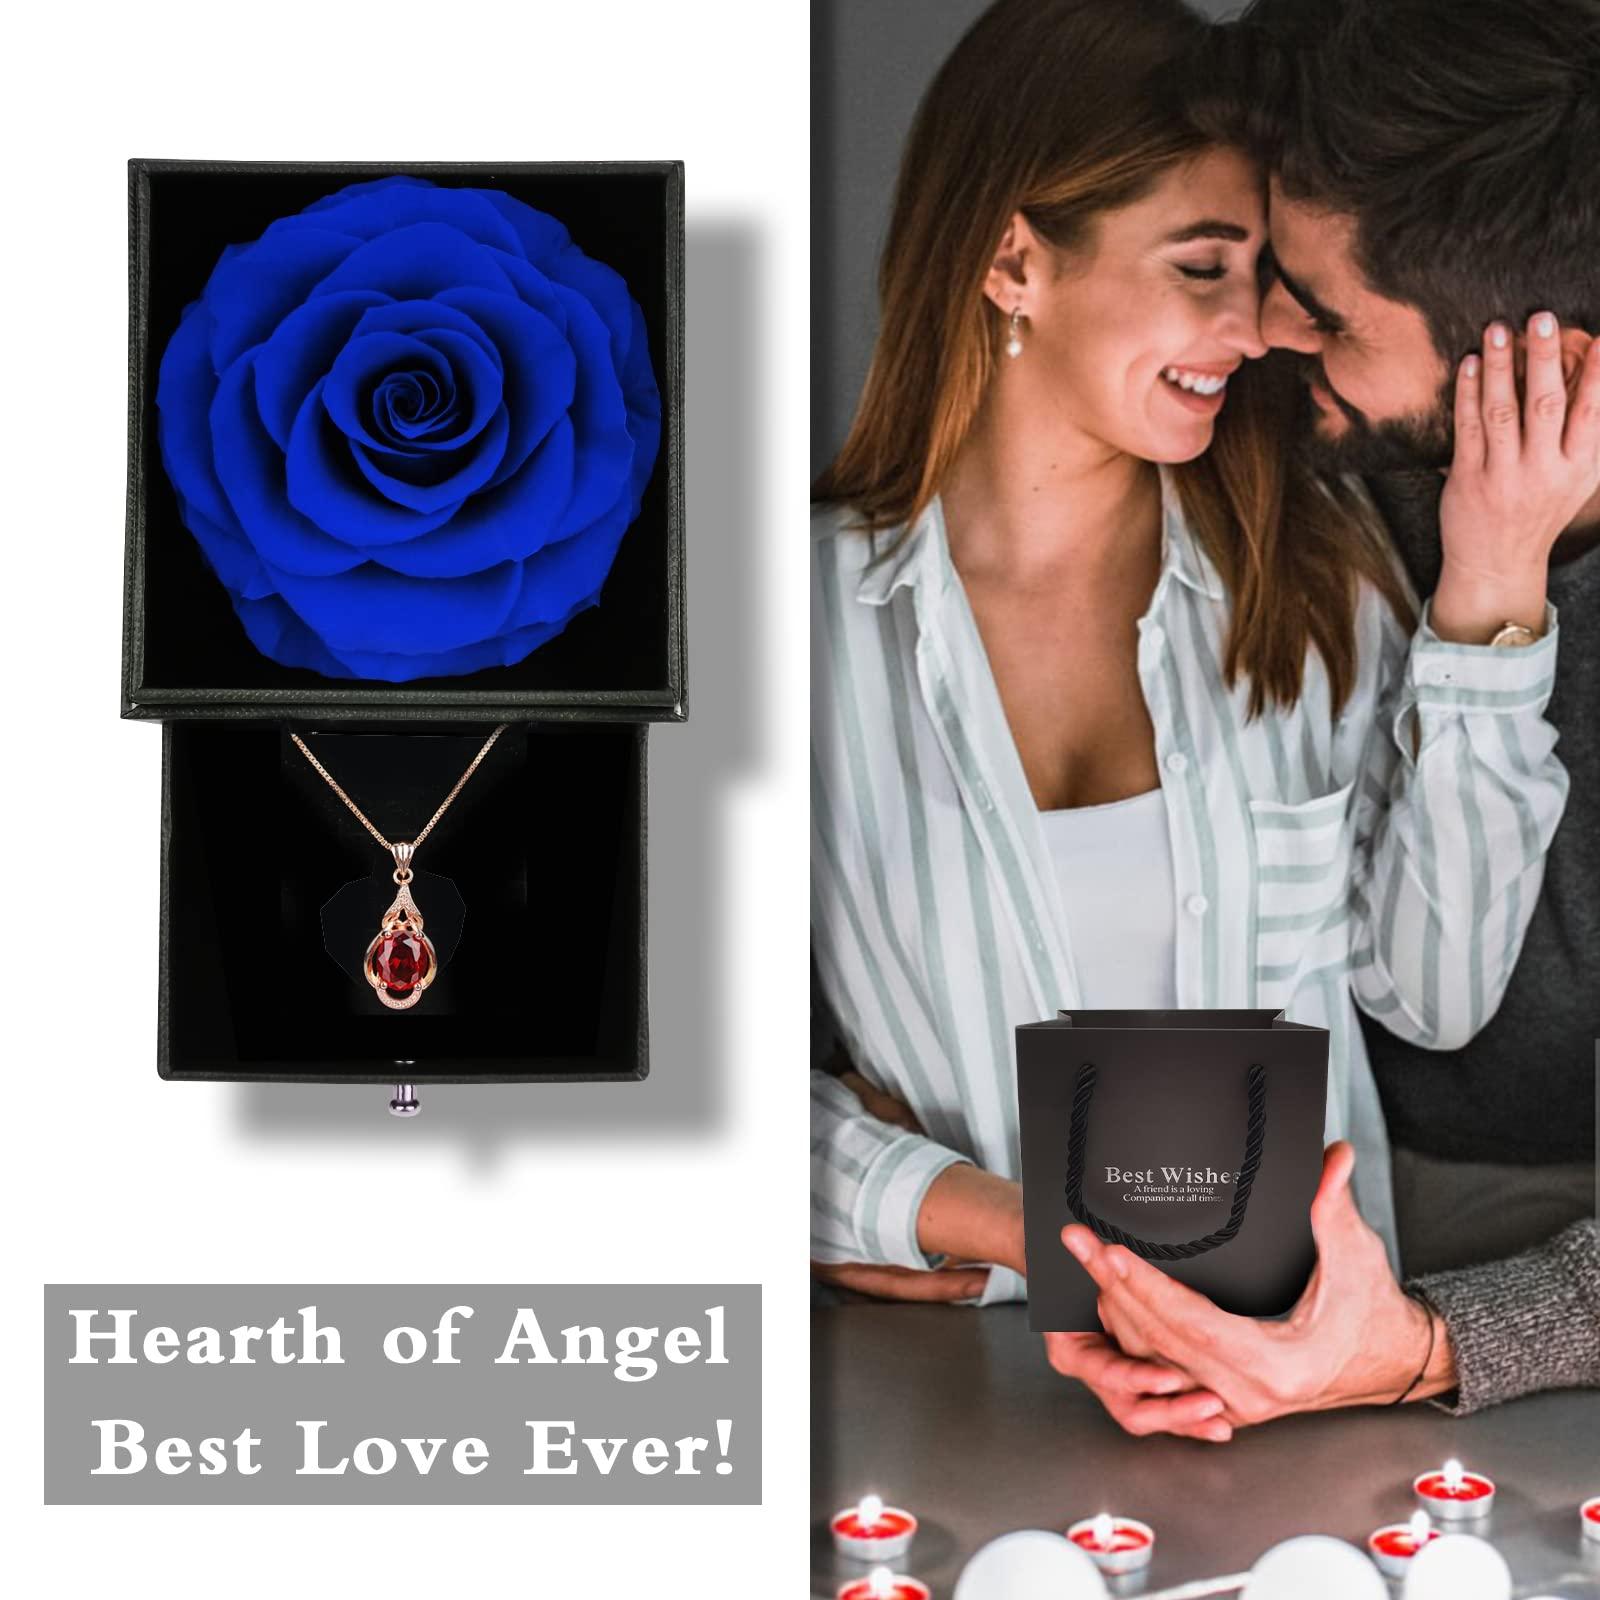 FIMAGO Preserved Real Rose with I Love You Necklace in 100 Languages Large Eternal Rose Gifts for Her for Wedding Anniversary Birthday Valentine's Day Mother's Day (YMY-PN_G-Frrr26) 4